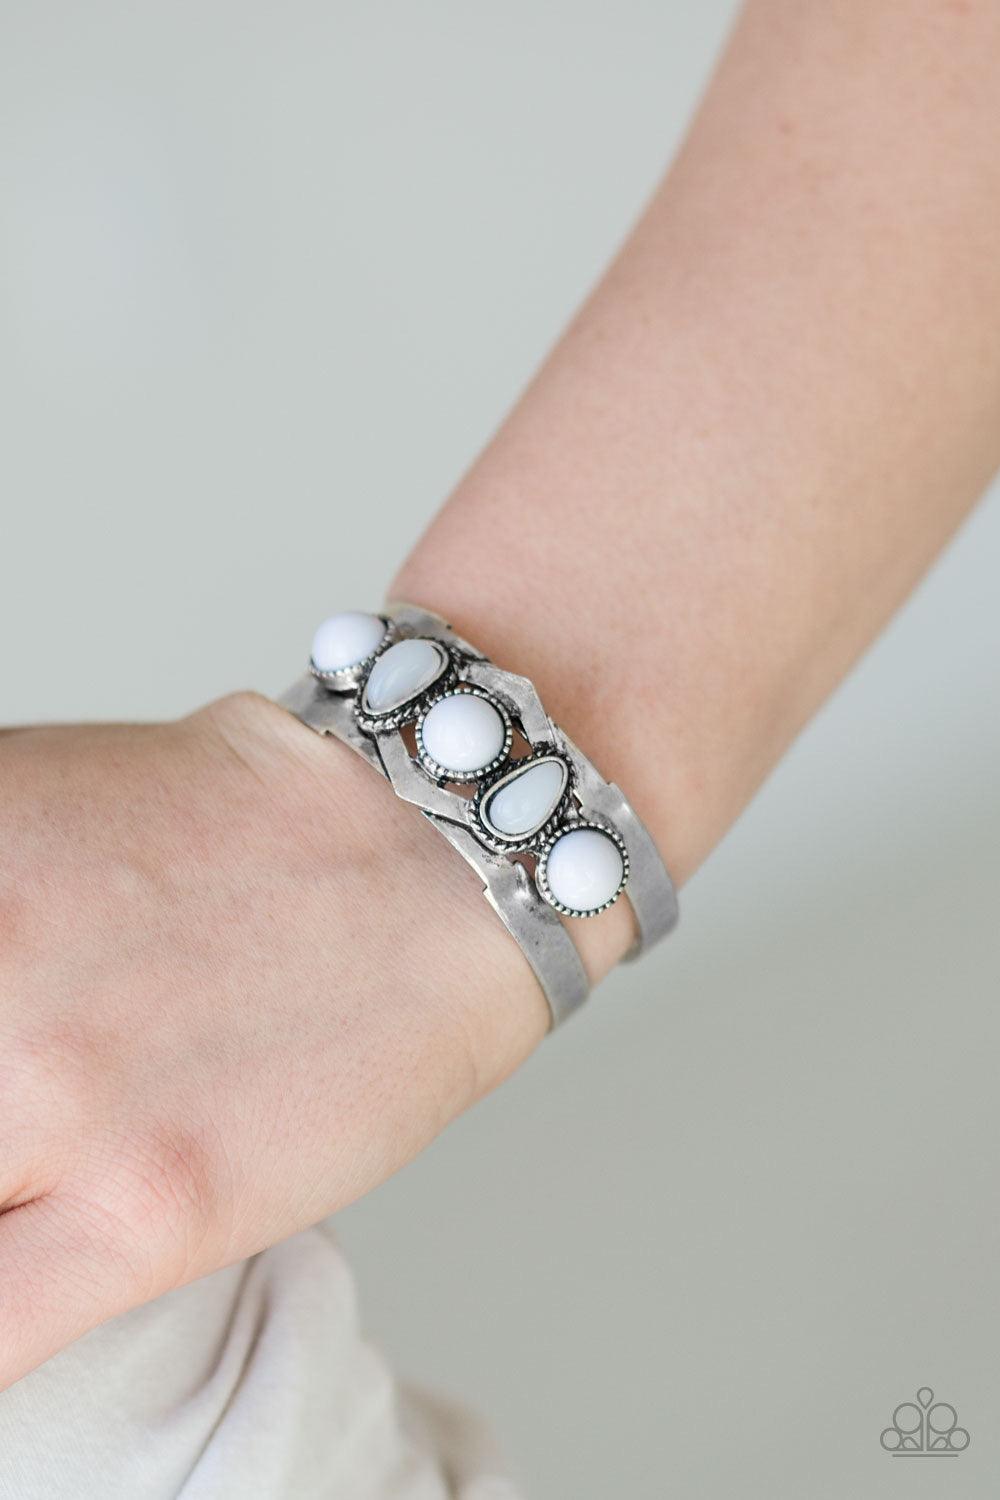 Paparazzi Accessories Keep On TRIBE-ing - Silver Featuring glassy and polished surfaces, shiny white and gray beads are pressed across the center of a silver cuff for a tribal inspired look. Sold as one individual bracelet. Jewelry